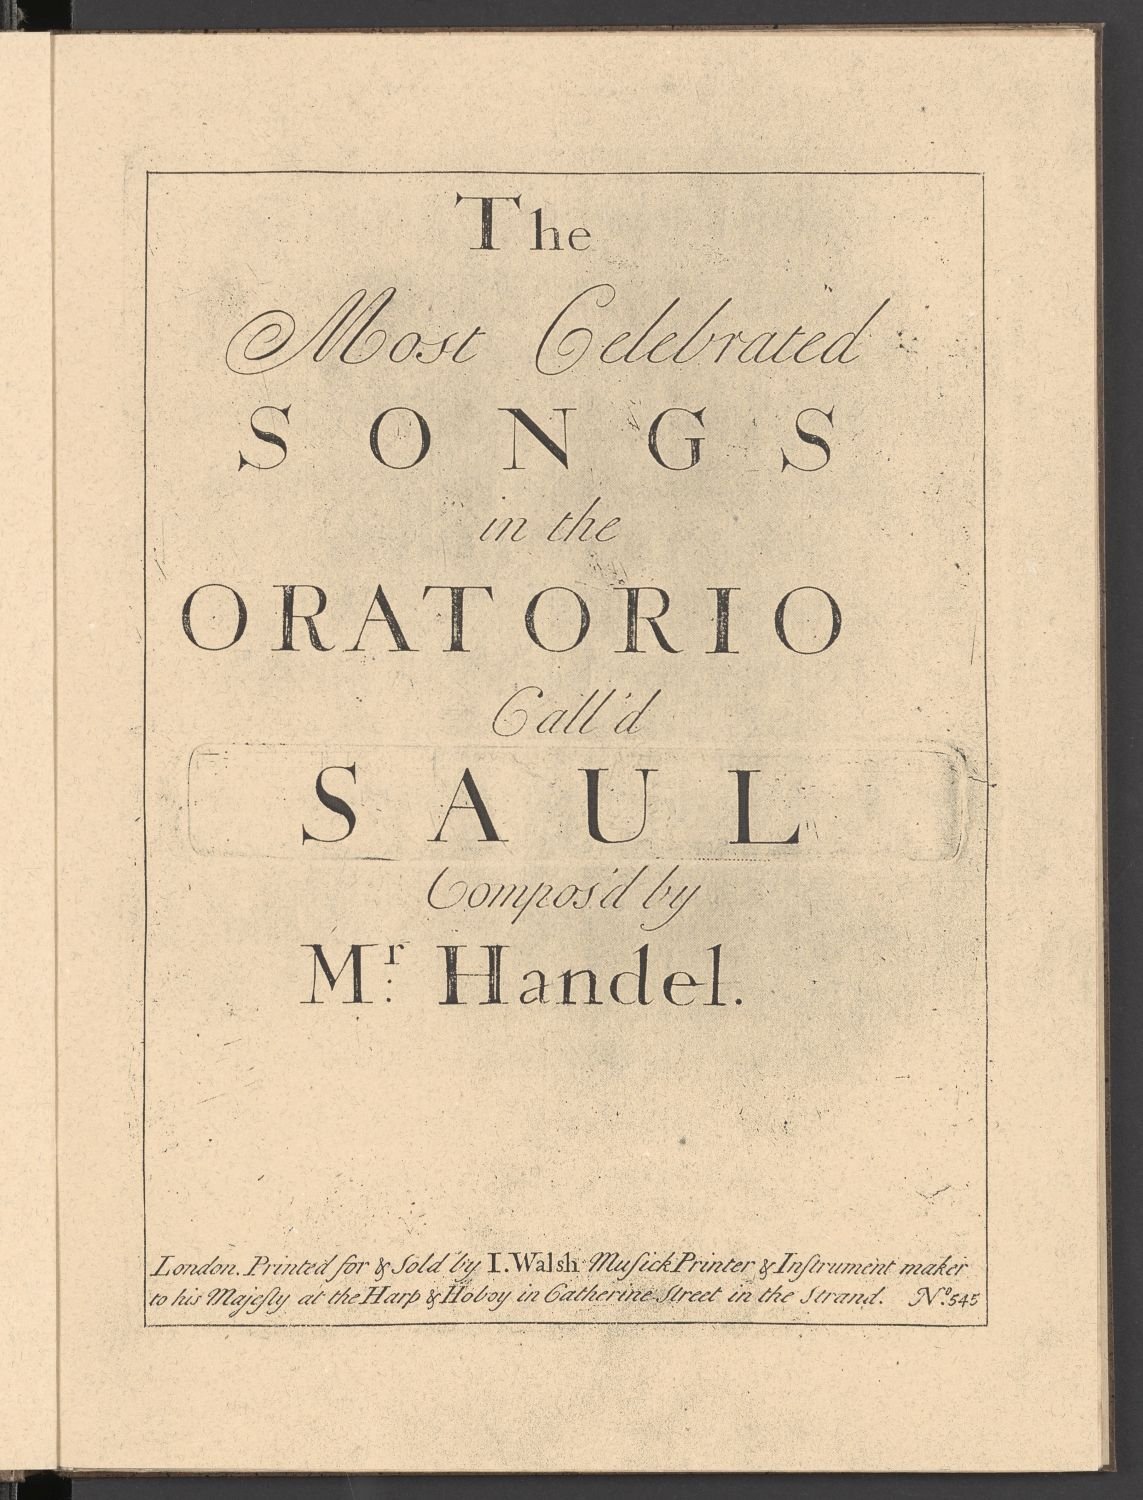 The most celebrated songs in the oratorio call'd Saul (Stiftung Händel-Haus CC BY-NC-SA)